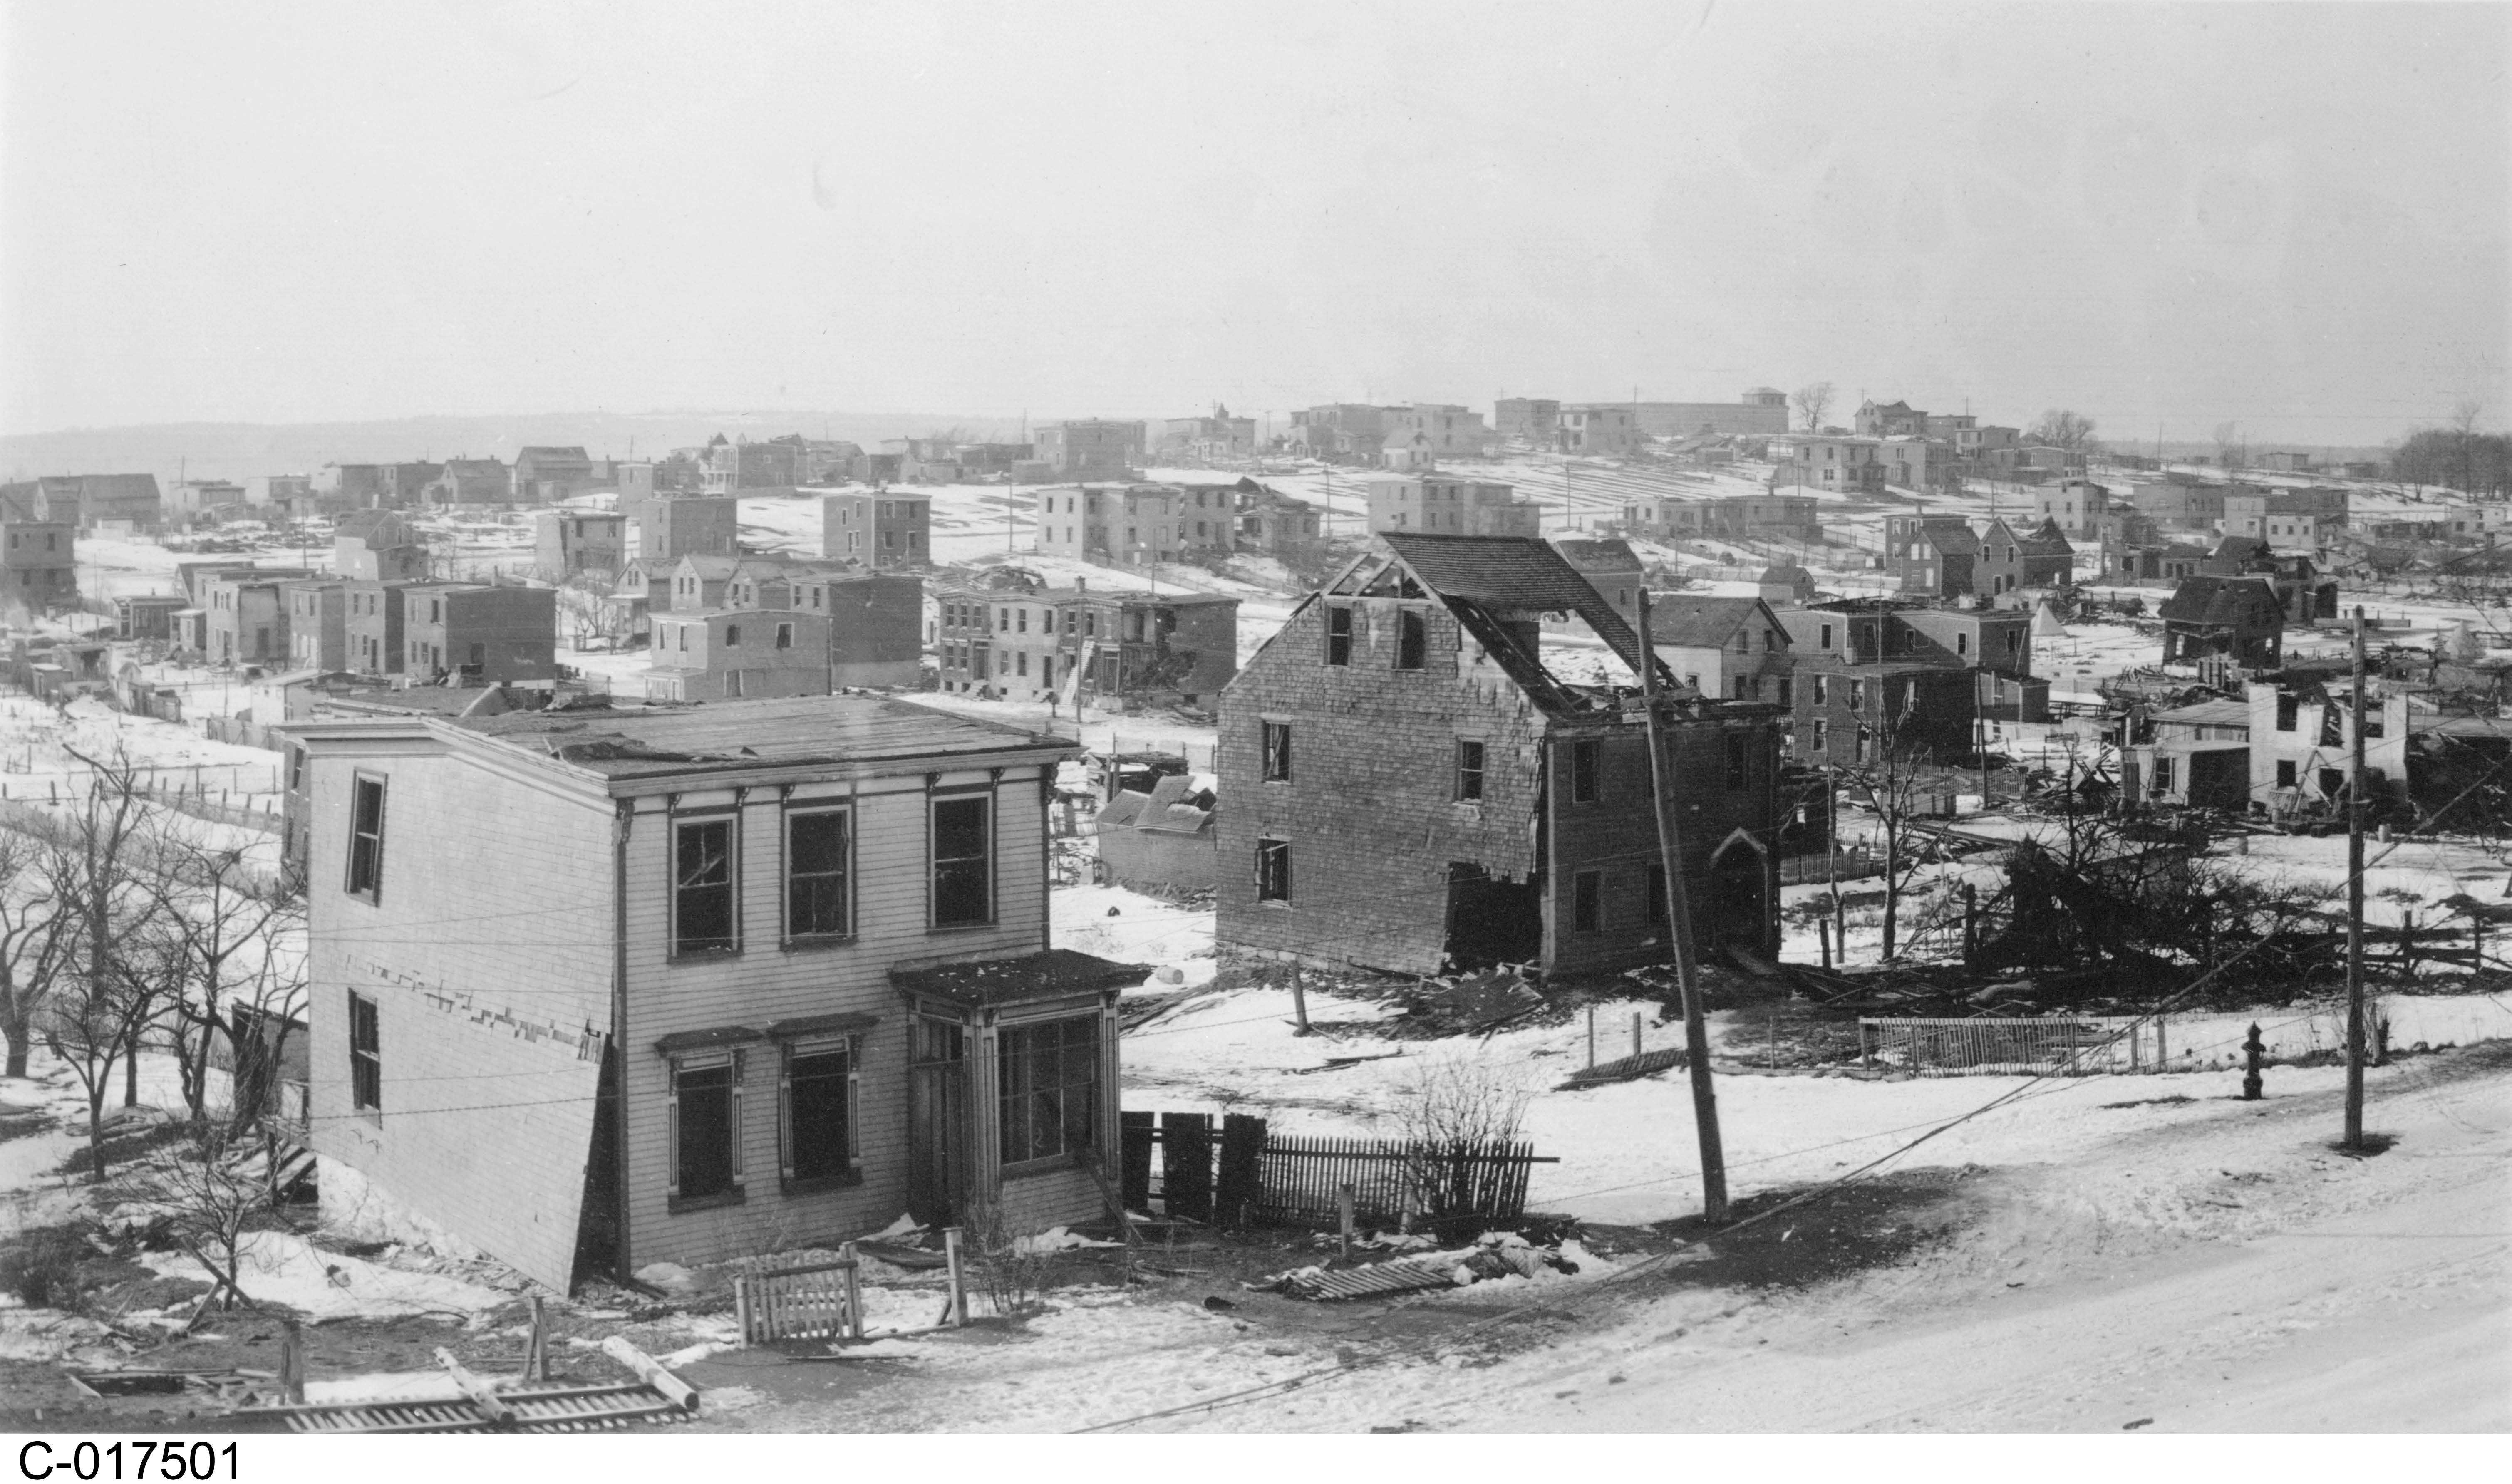 Black and white photograph. Snow, rubble, charred trees, and the ruins of buildings can be seen everywhere. Houses with their windows blown out go far into the distance. There is evidence of dust in the air.